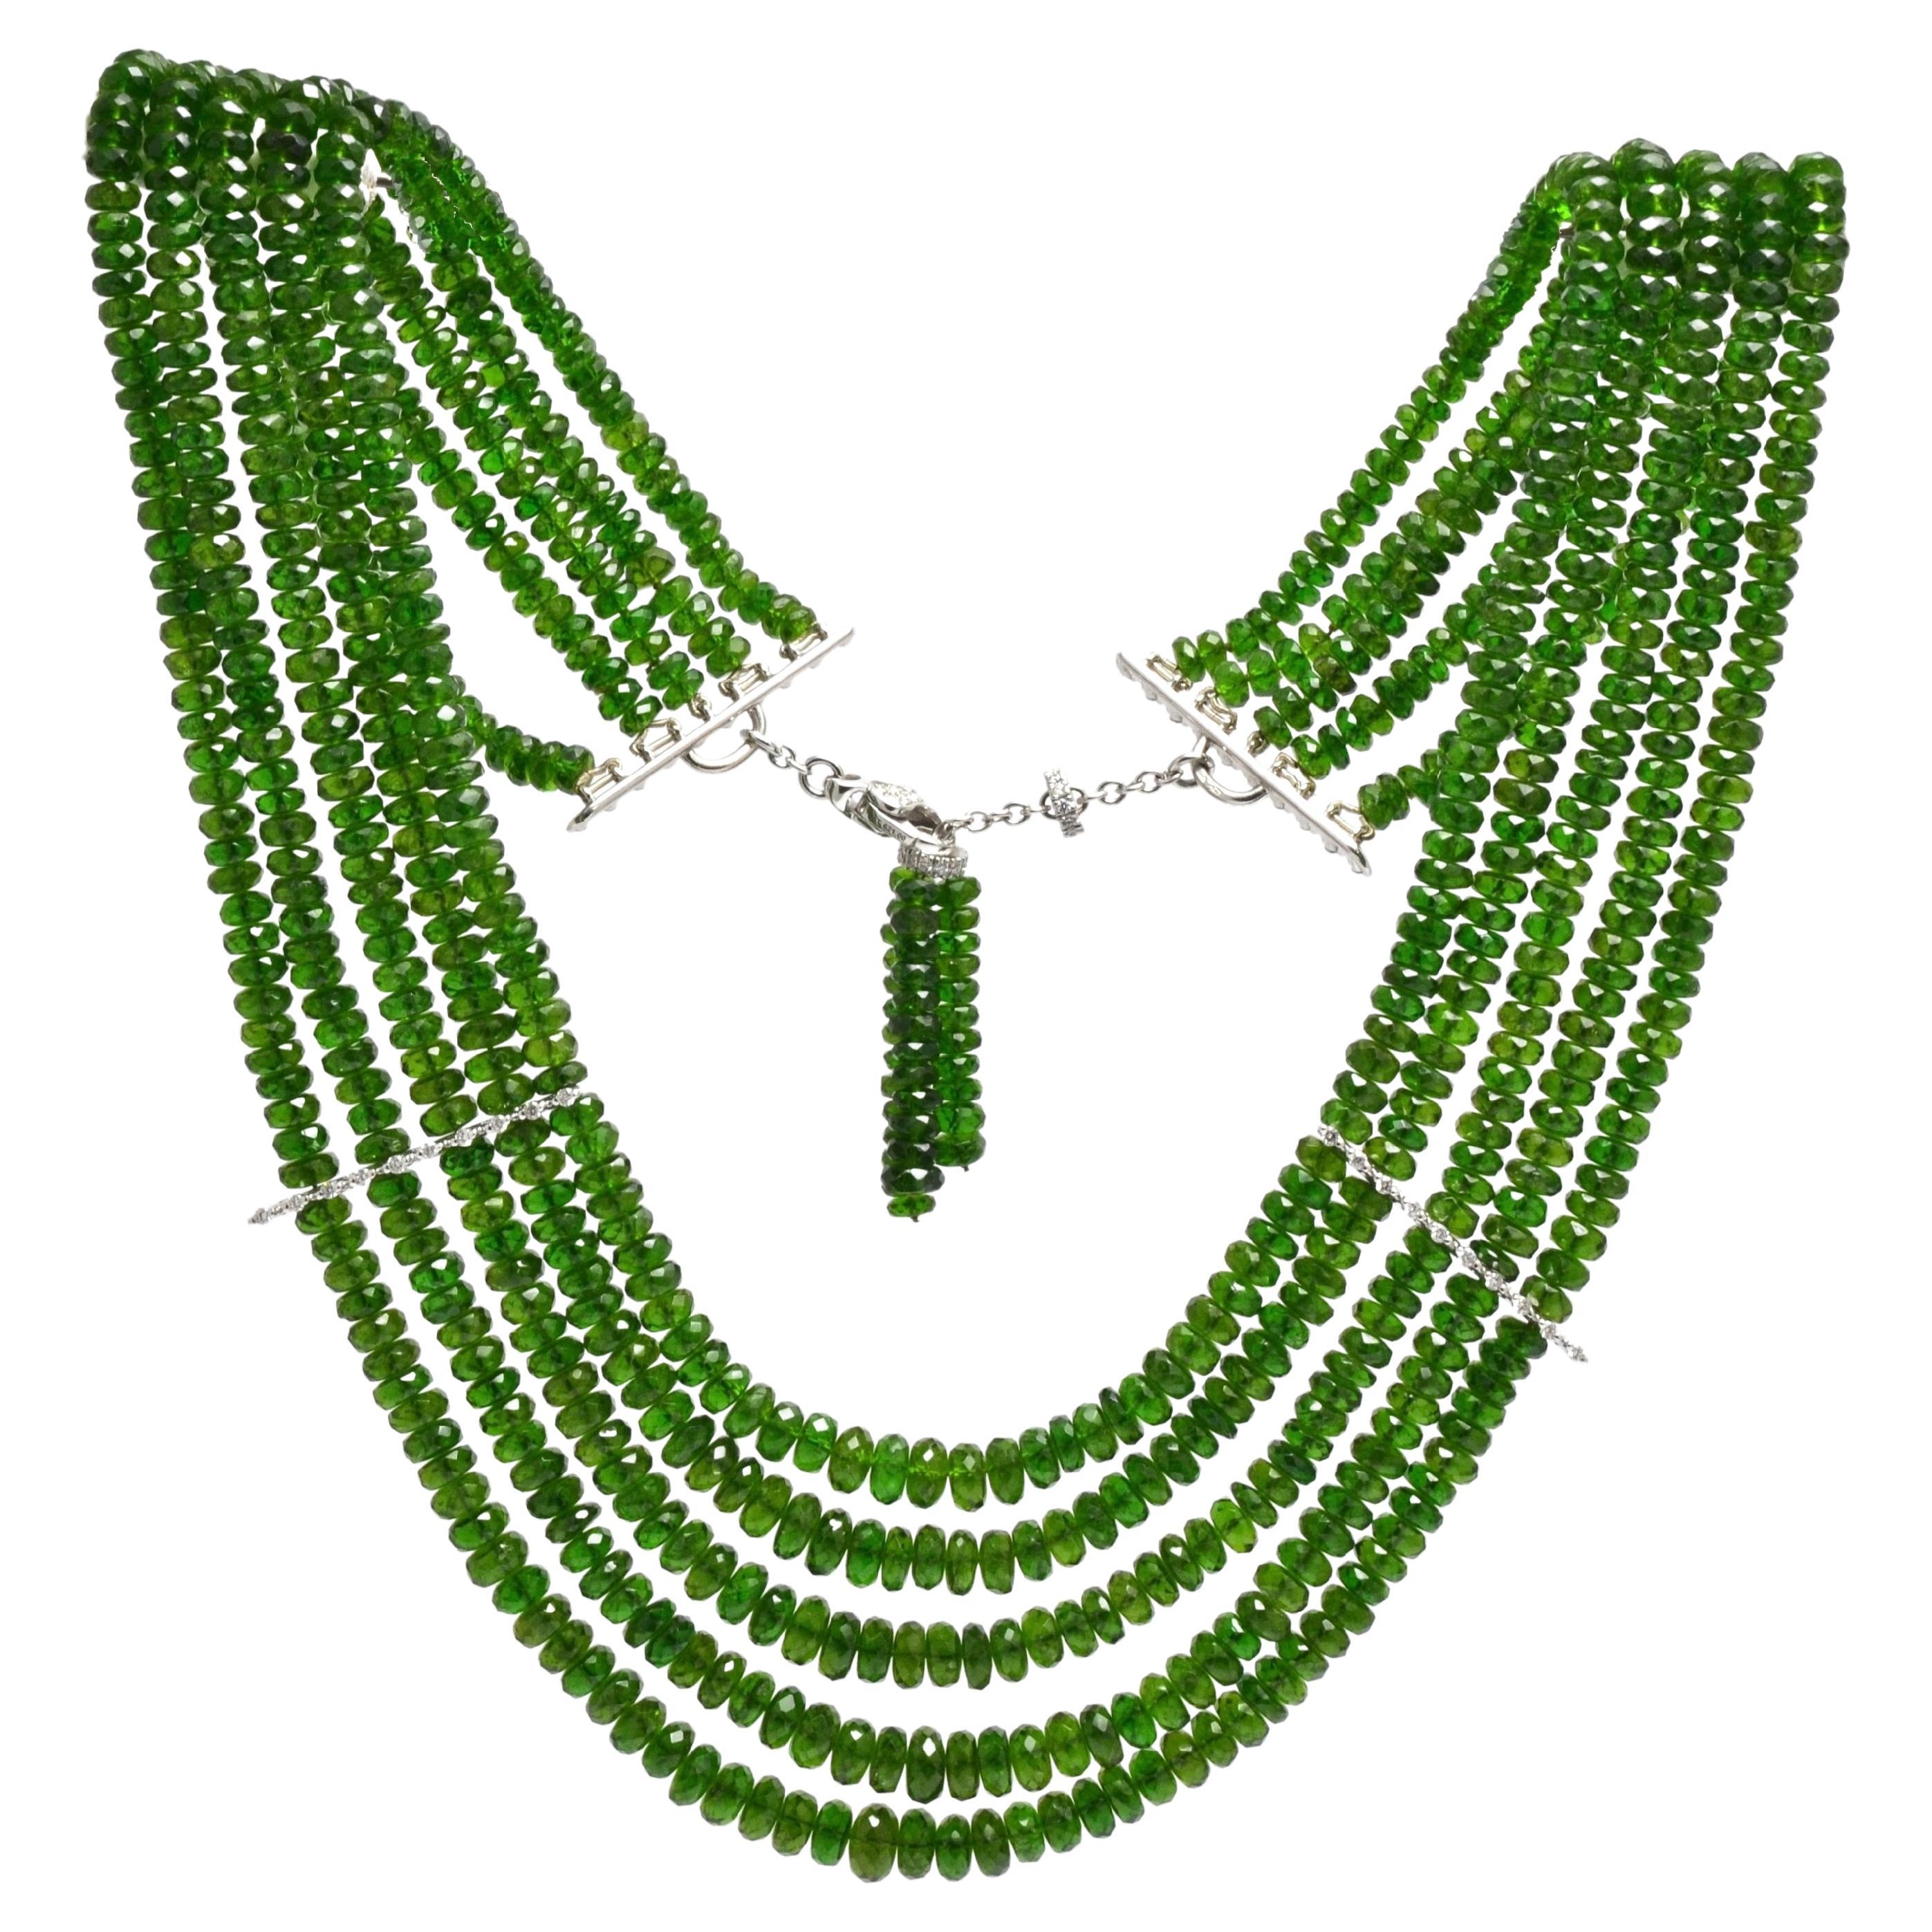 Vivid green tourmalines necklace featuring 5 strands of faceted degrade beads.
Detailed by two spacers of diamonds set on white gold.
Same style clasp, decorated by diamonds, decorated by a  tassel of green tourmalines.
Length is adjustable.
Elegant